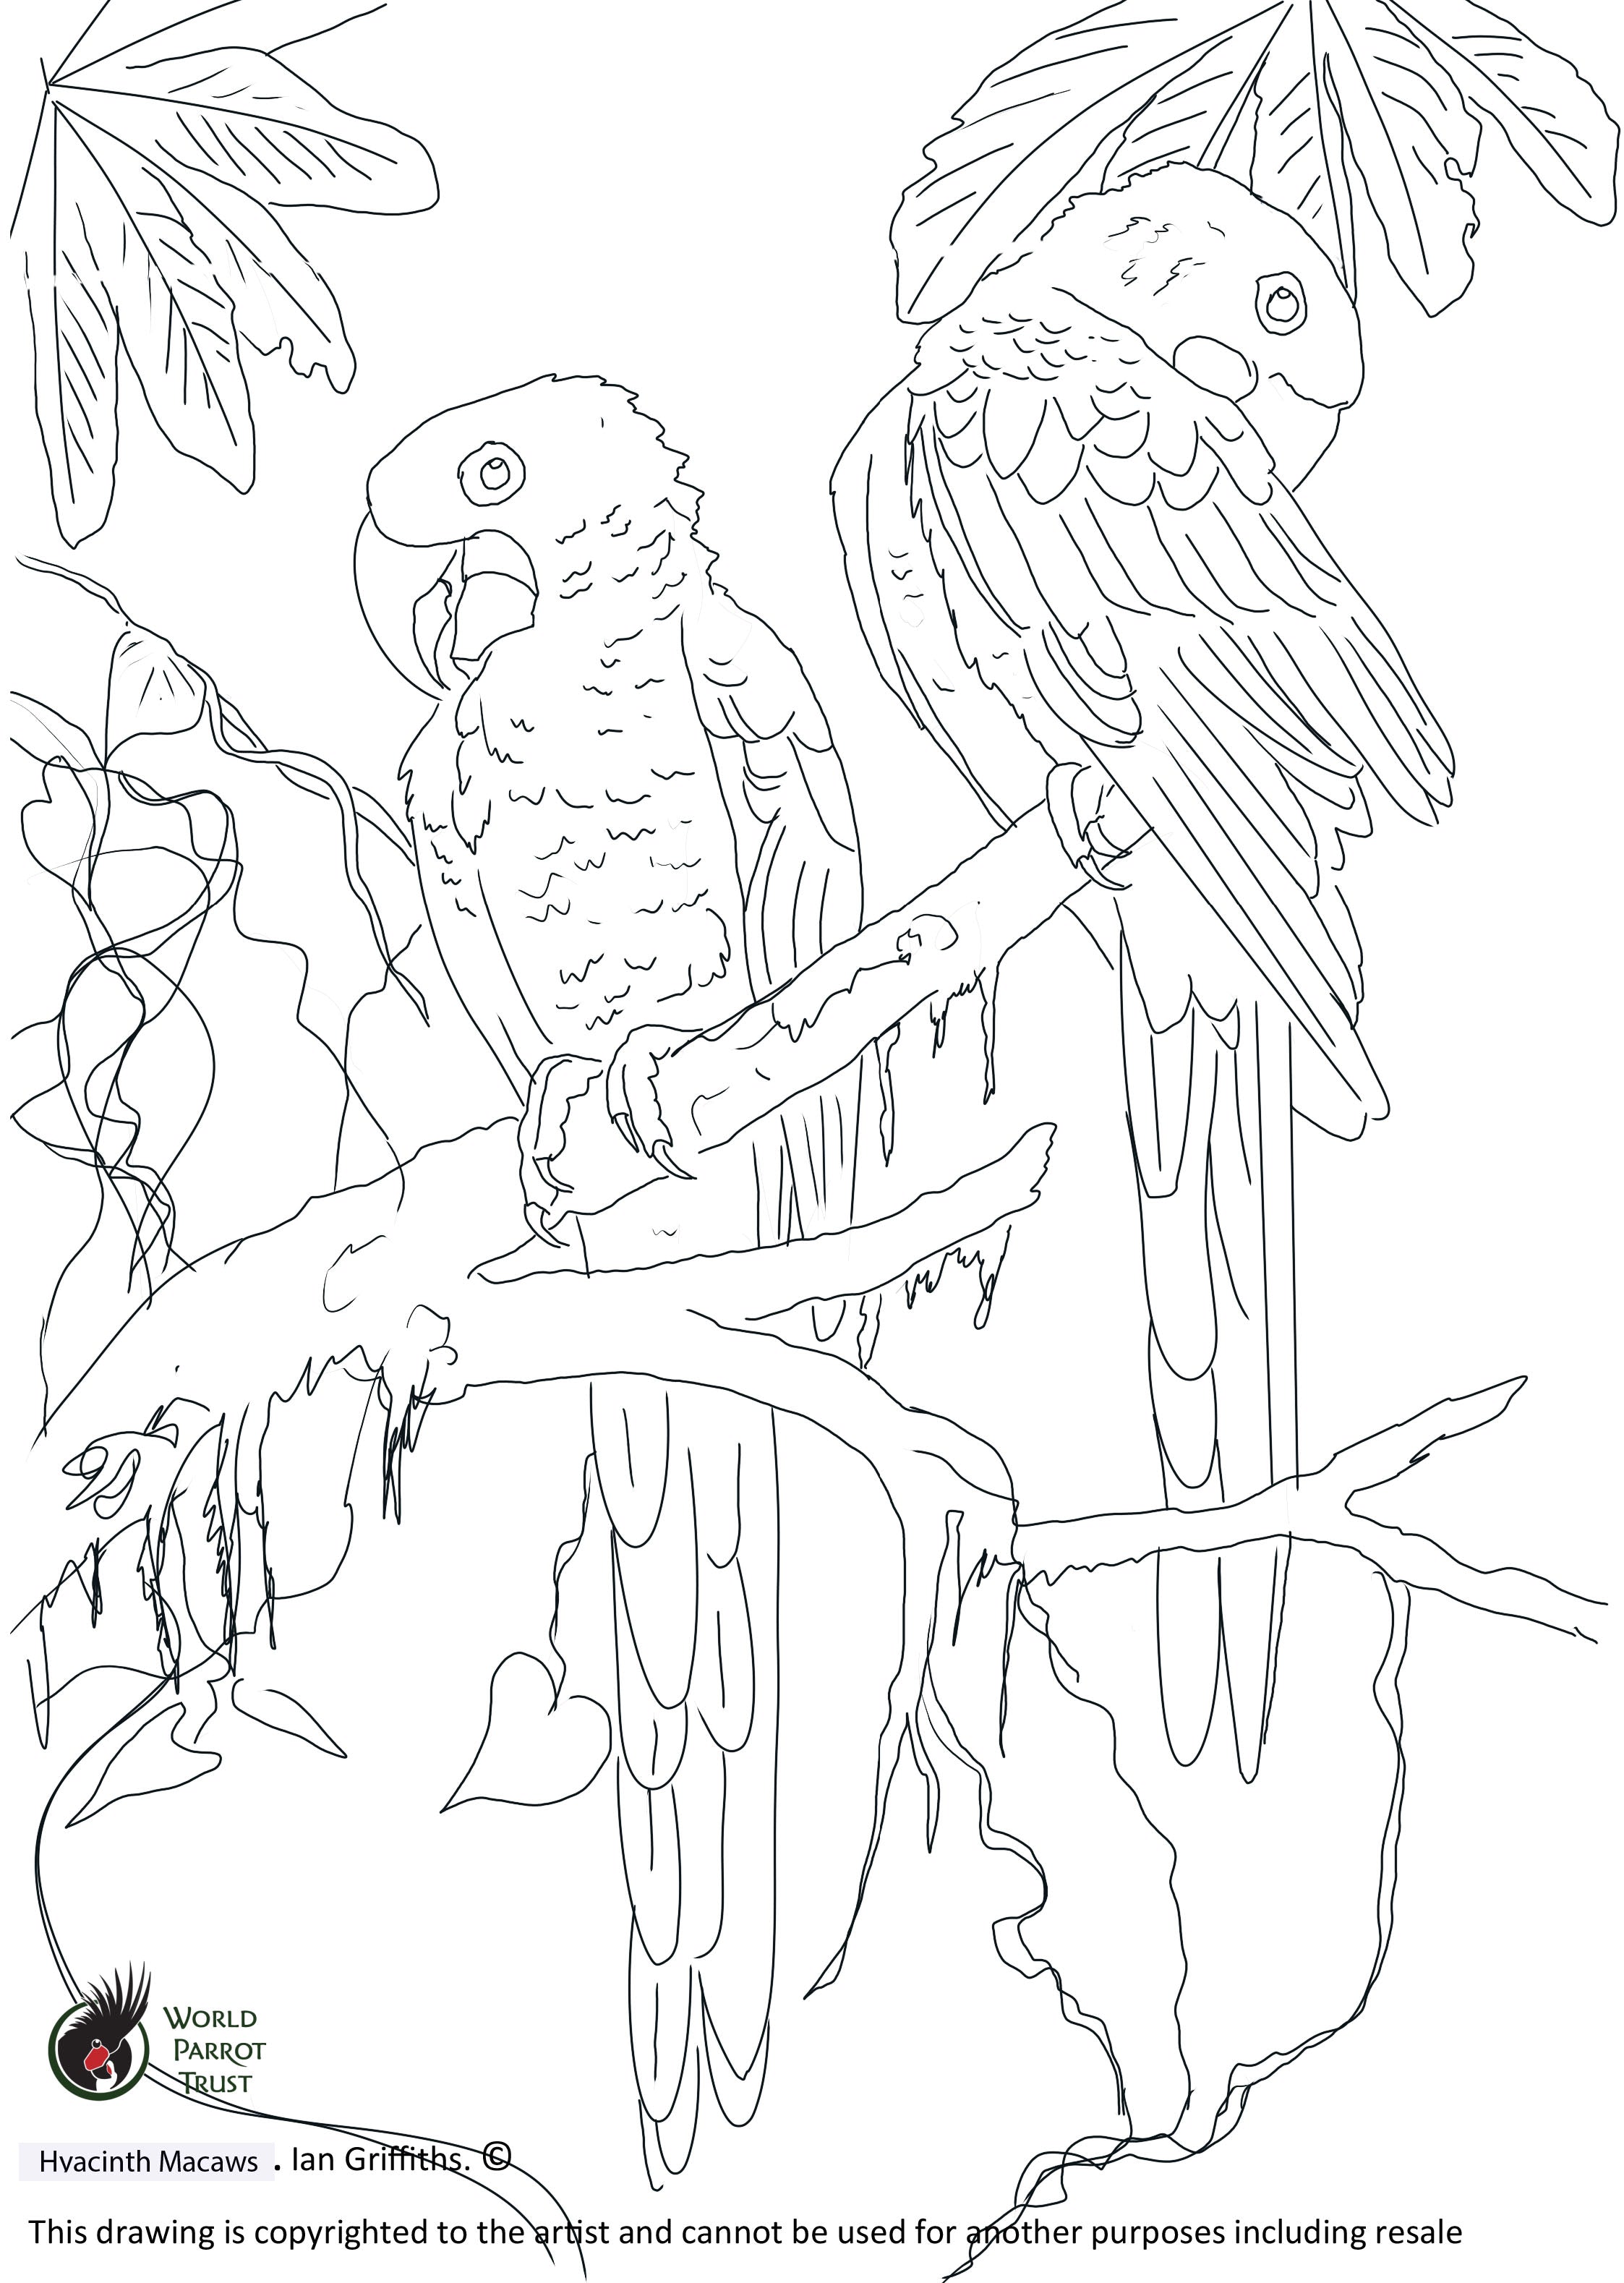 Free colouring page - Hyacinth Macaws | International World Parrot ...